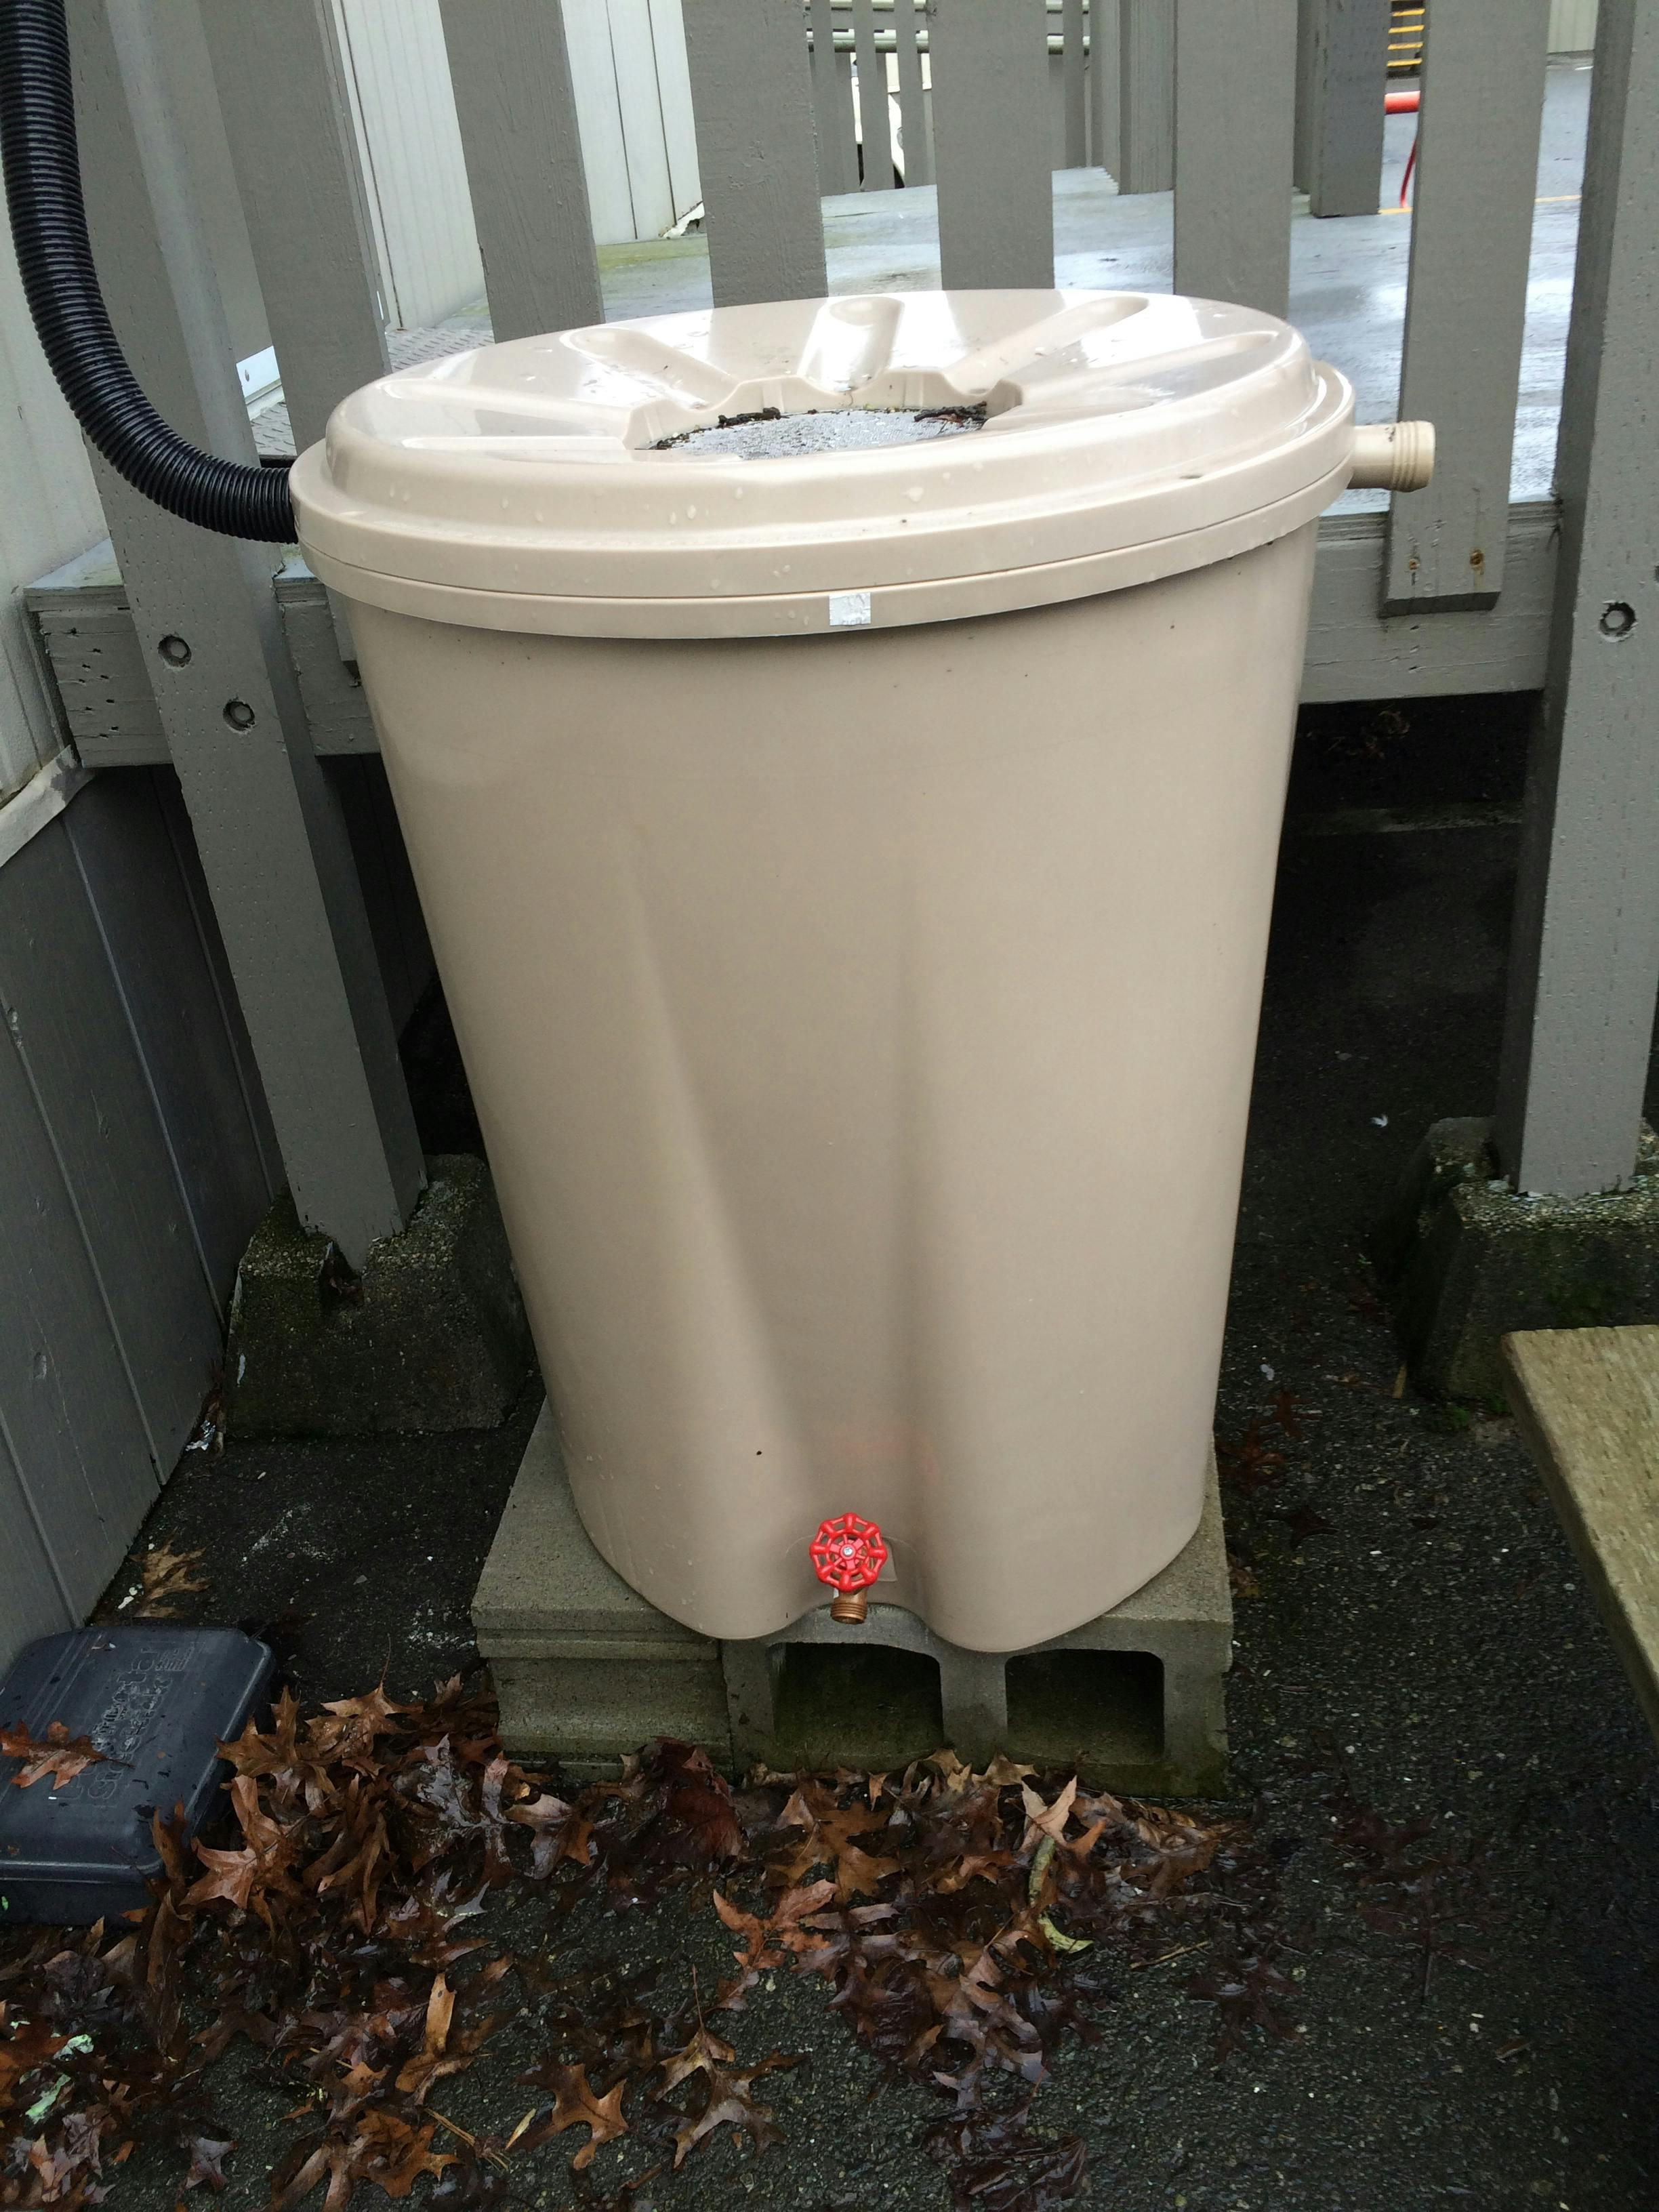 Rain barrels allow residents to collect and store water for uses such as watering gardens and washing vehicles. Ask us about our Rain Barrel Program.